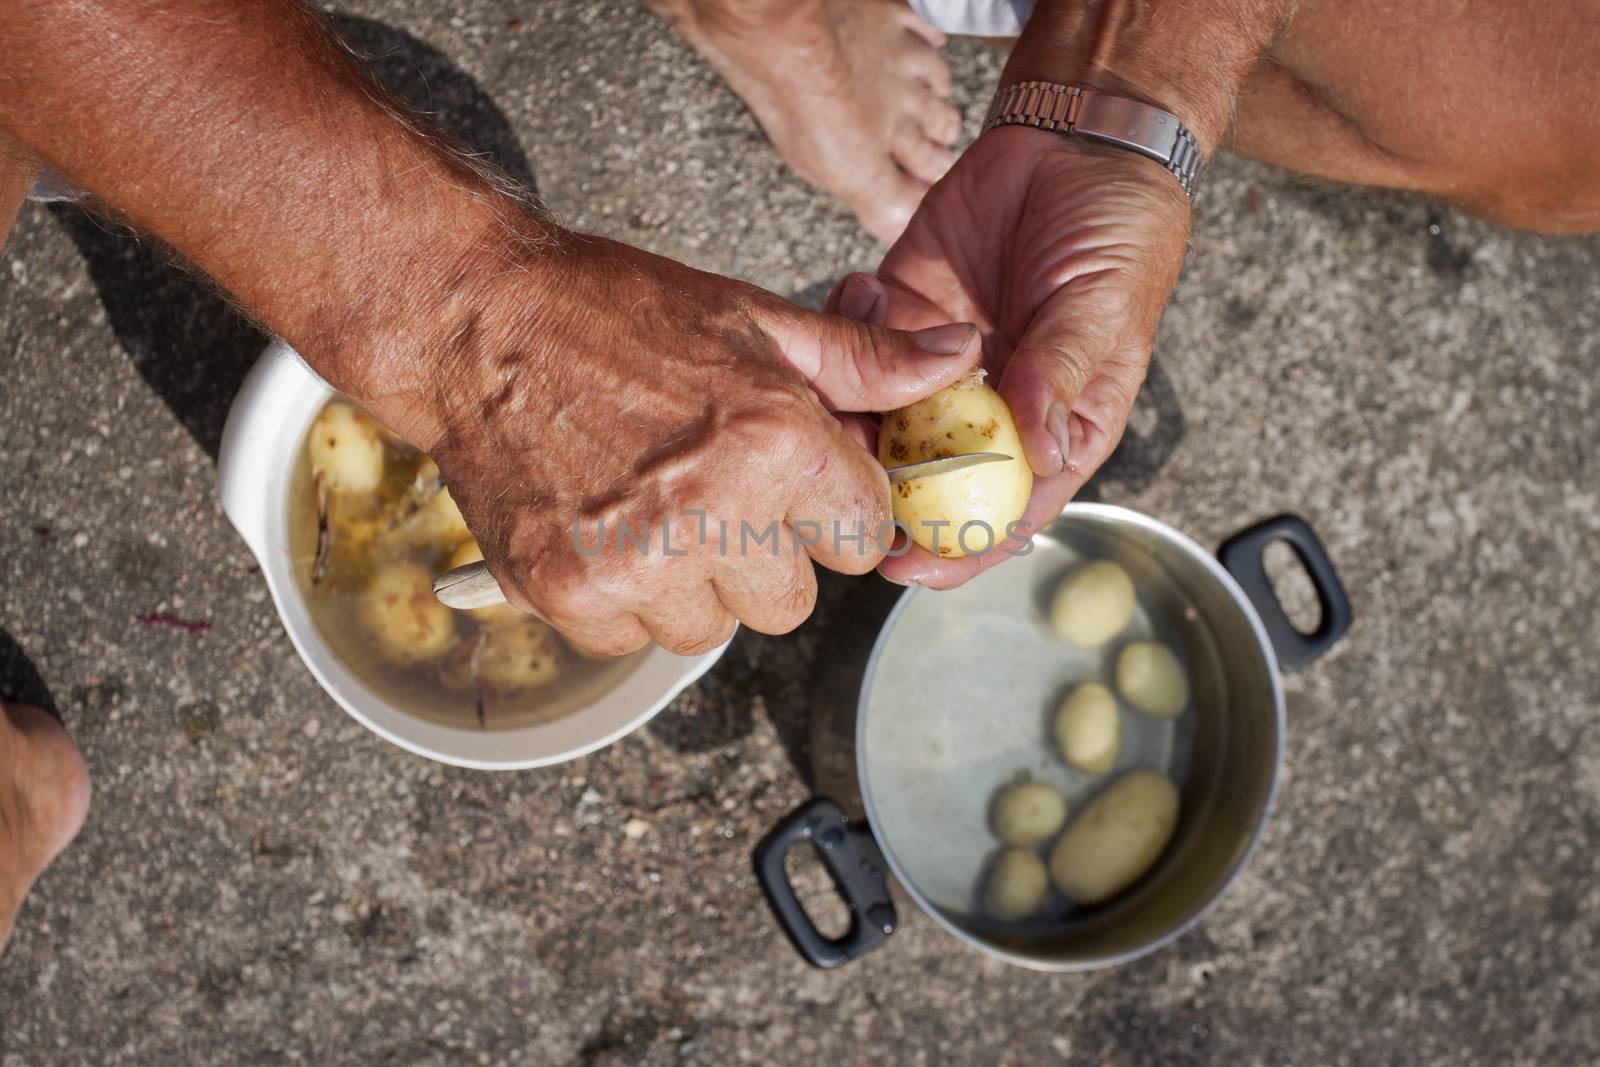 Traditional way of peeling potatoes by annems